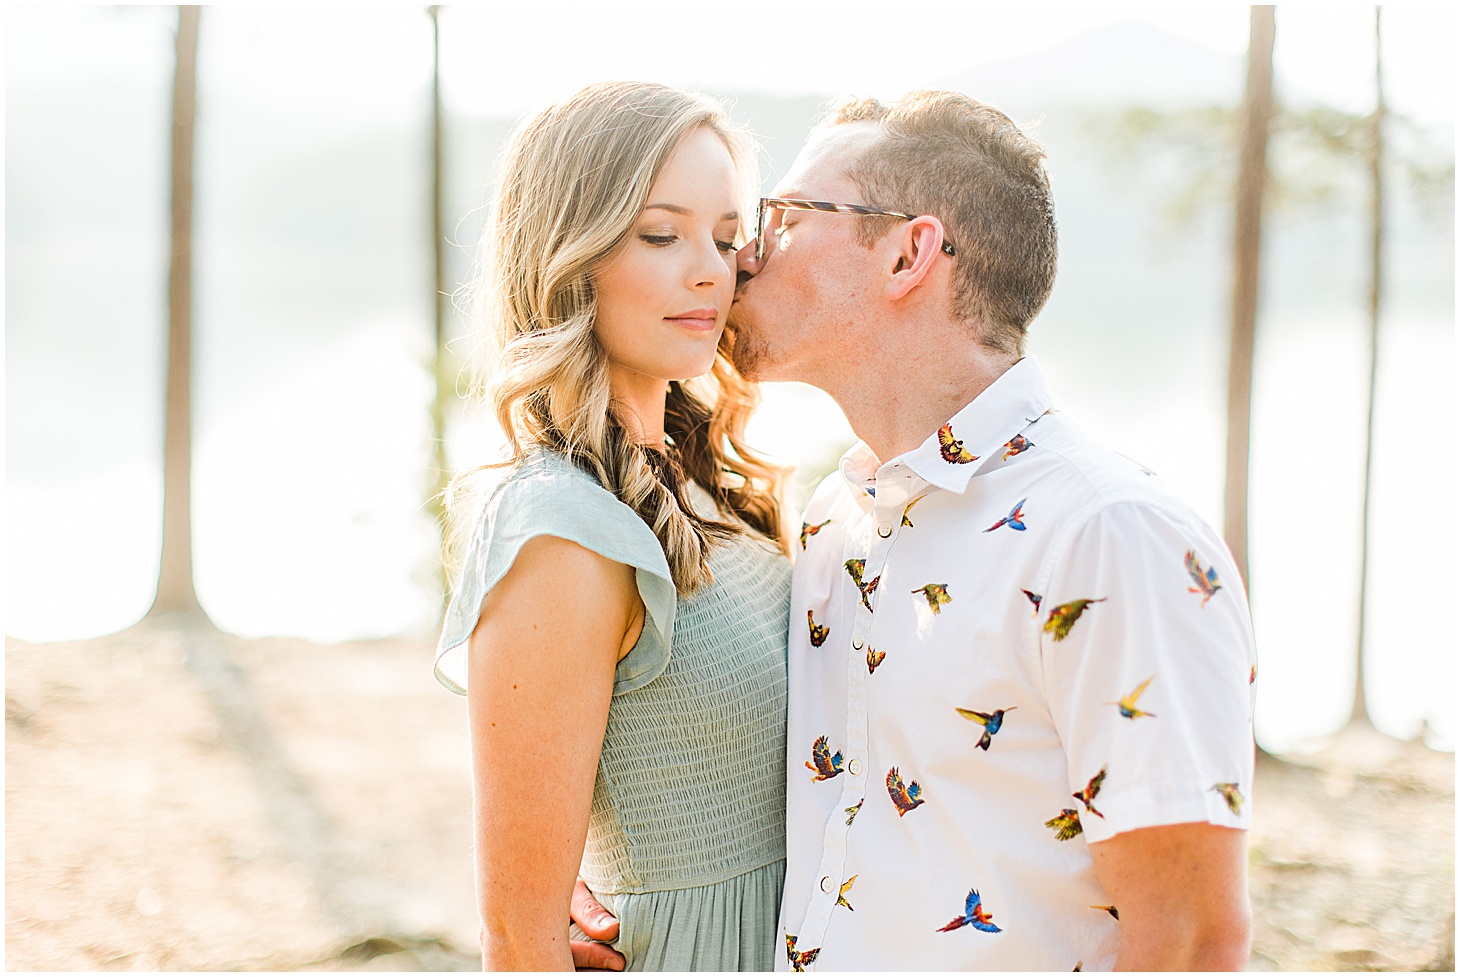 carvinscove_roanokeengagementsession_virginiaweddingphotographer_vaweddingphotographer_photo_0020.jpg